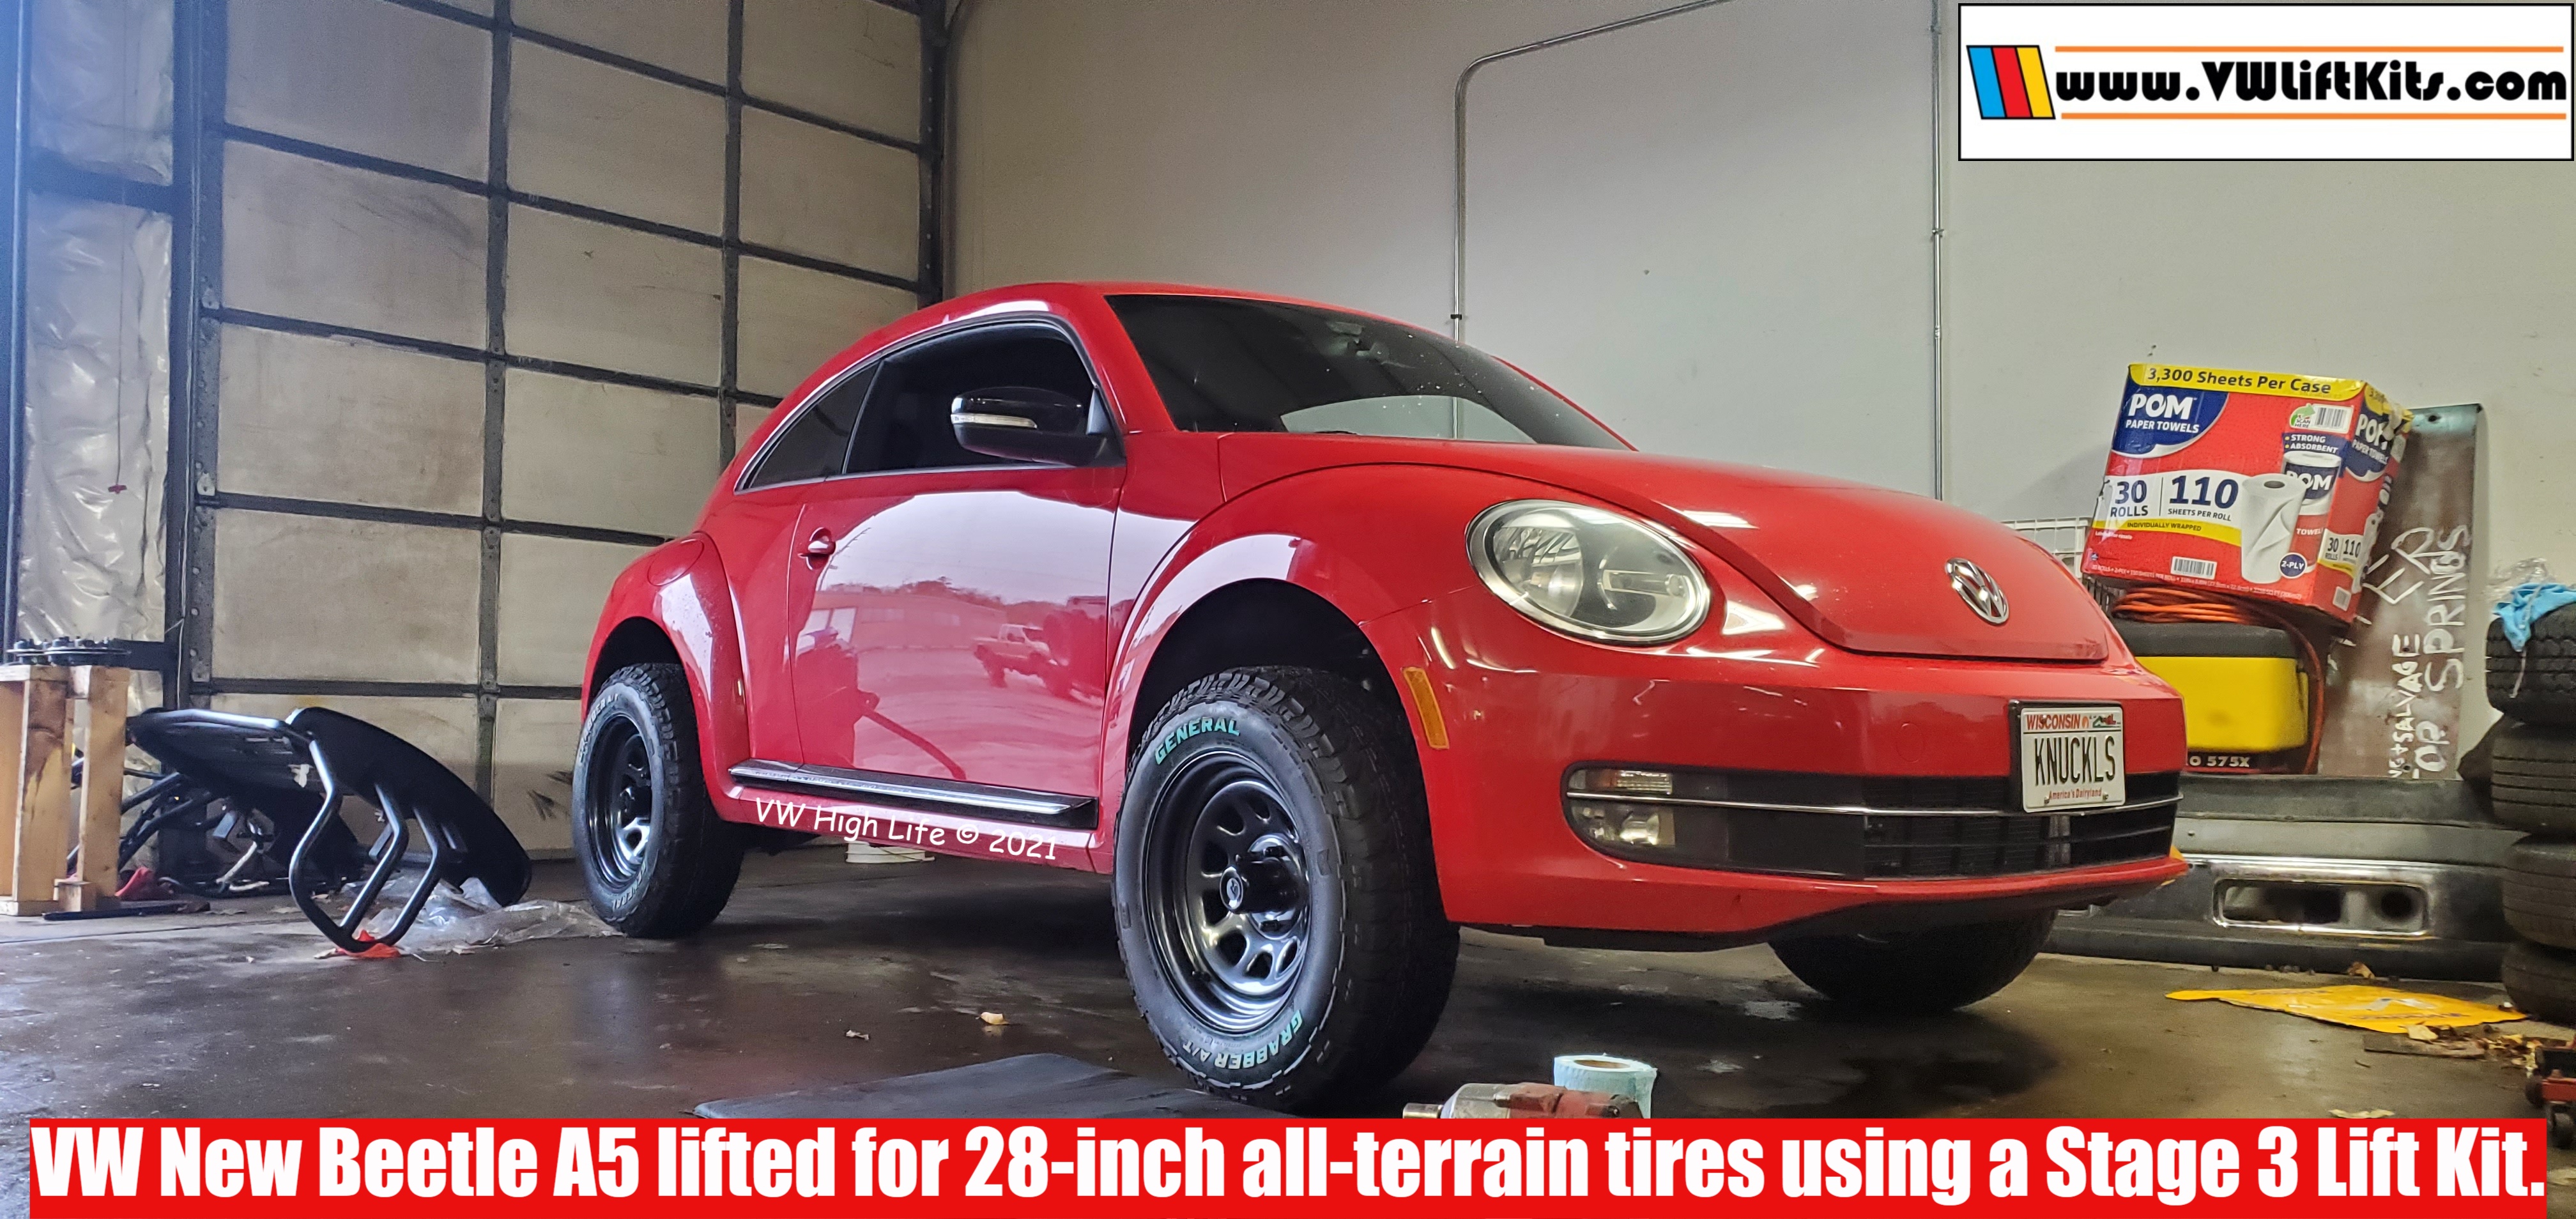 This VW New Beetle A5 aka "Knuckles" is properly raised w/ a Stage 3 Lift Kit for 28-inch AT tires.